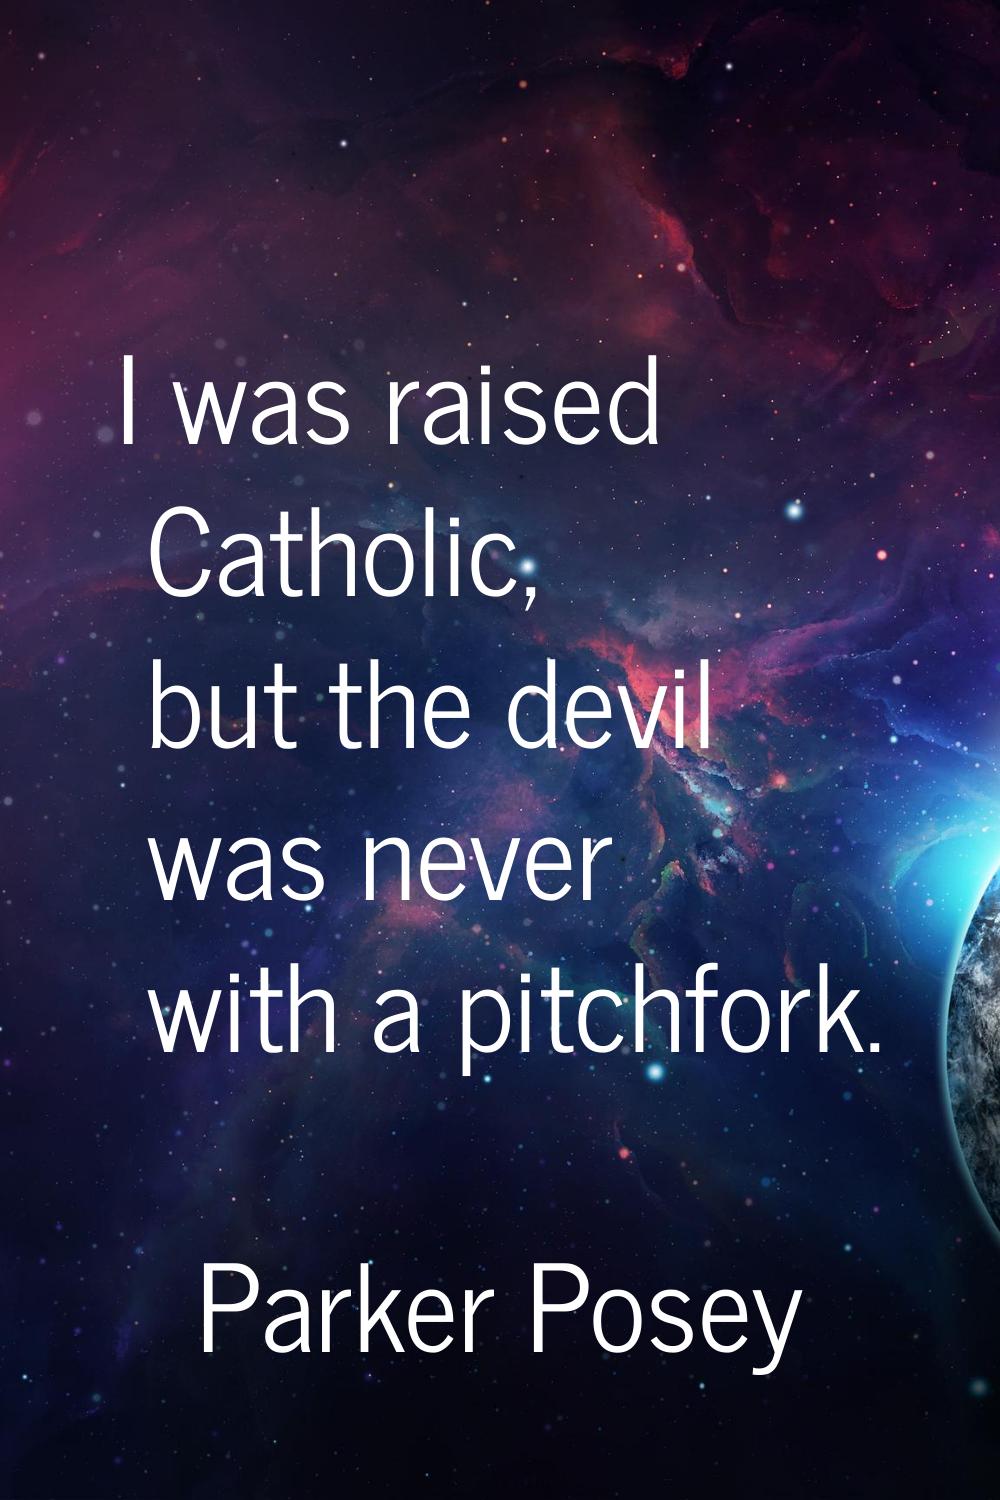 I was raised Catholic, but the devil was never with a pitchfork.